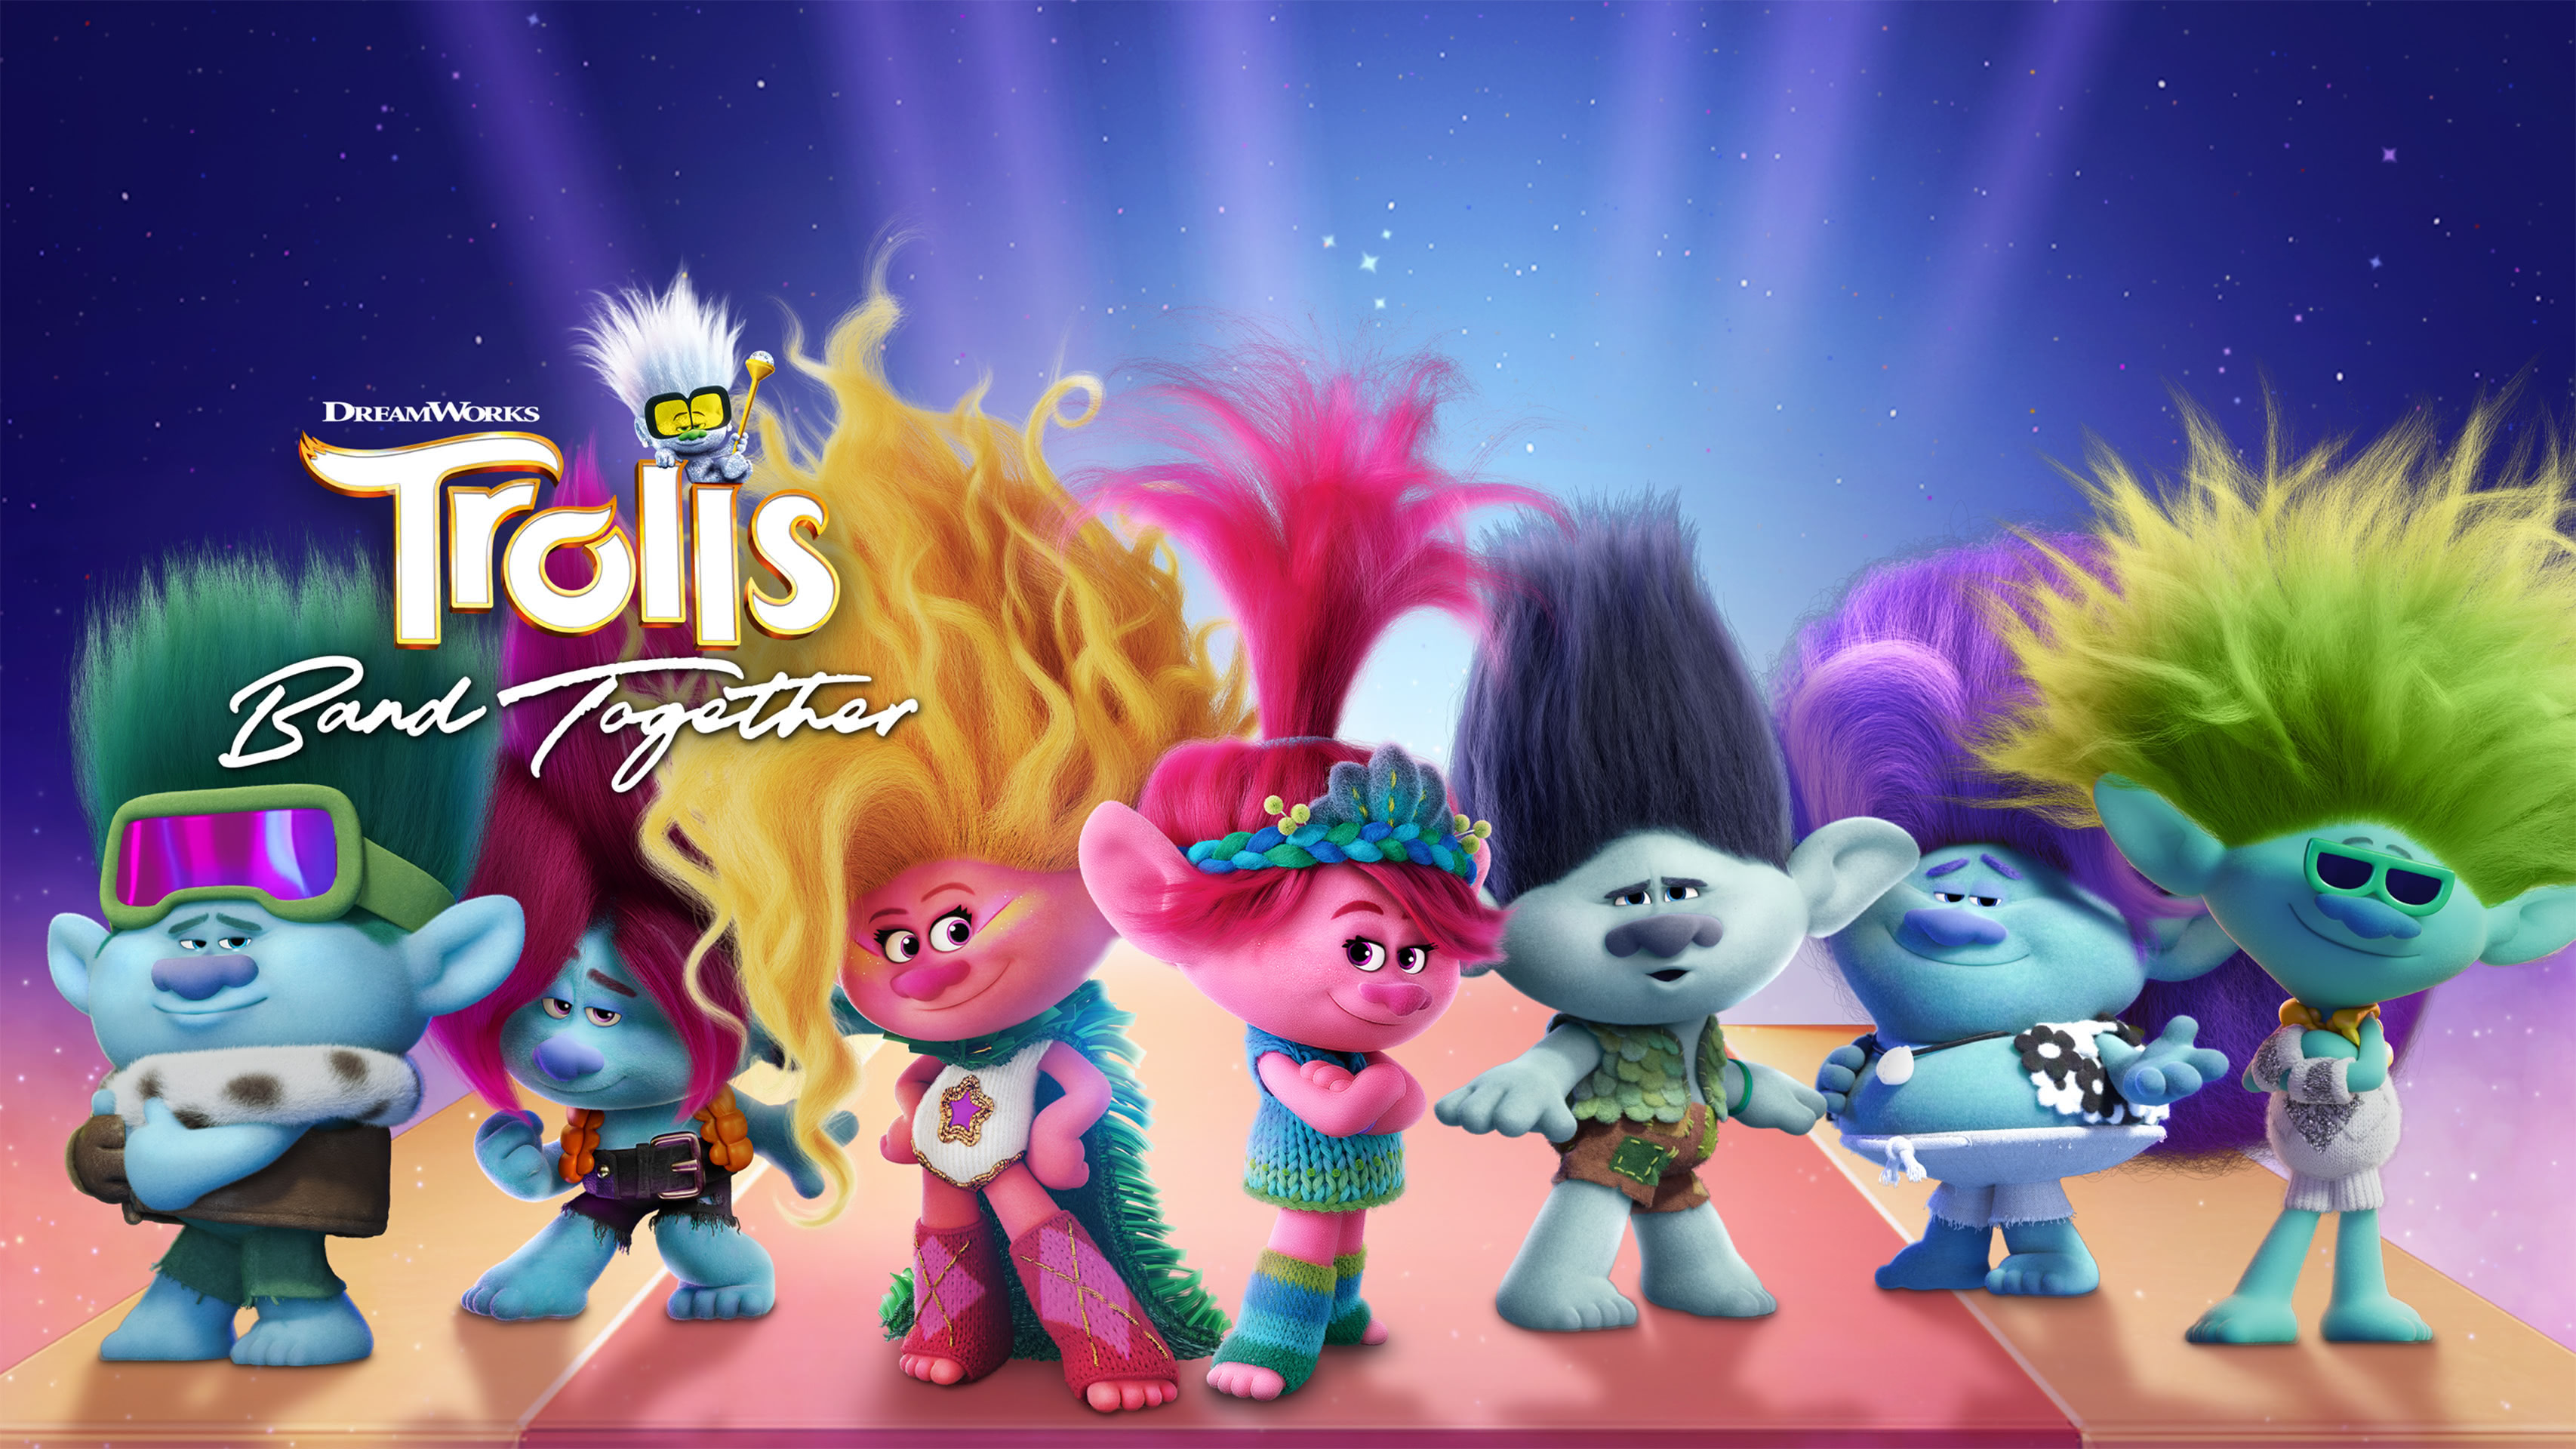 Win 'trolls Band Together' 4k Digital Download – Join Poppy And Branch 